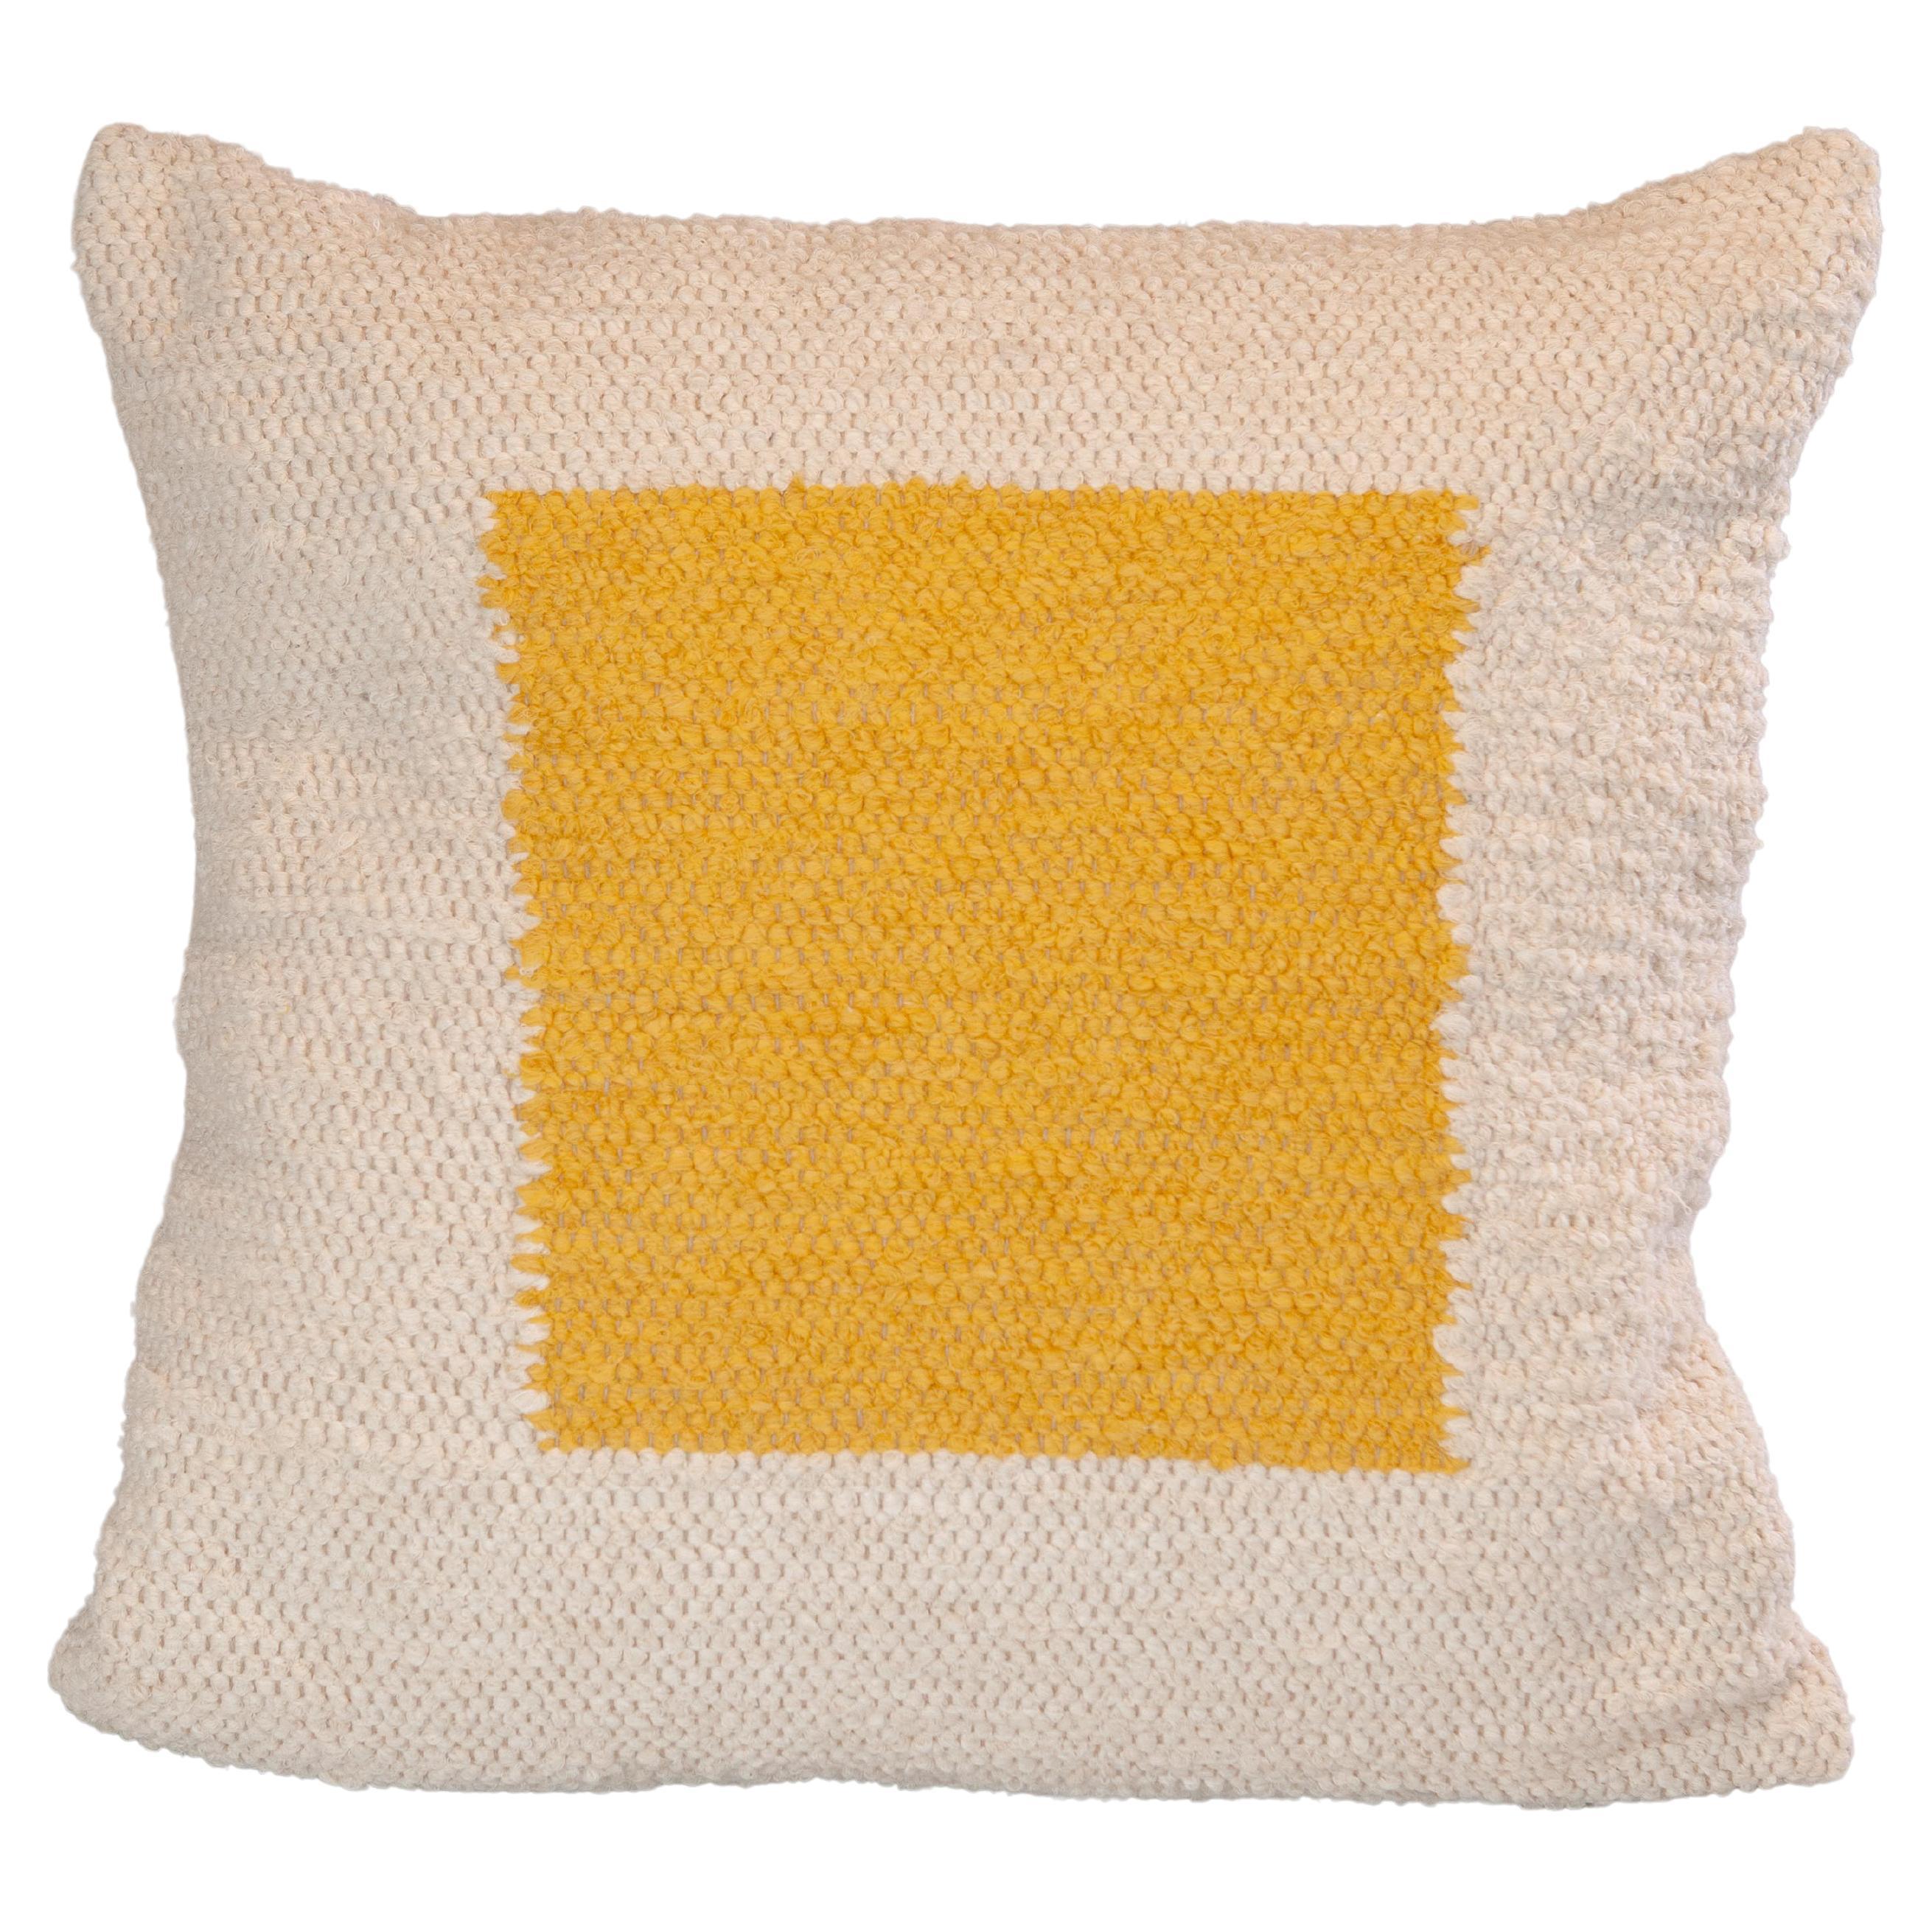 Handwoven Recycled Cotton Yellow Square Throw Pillow, in Stock